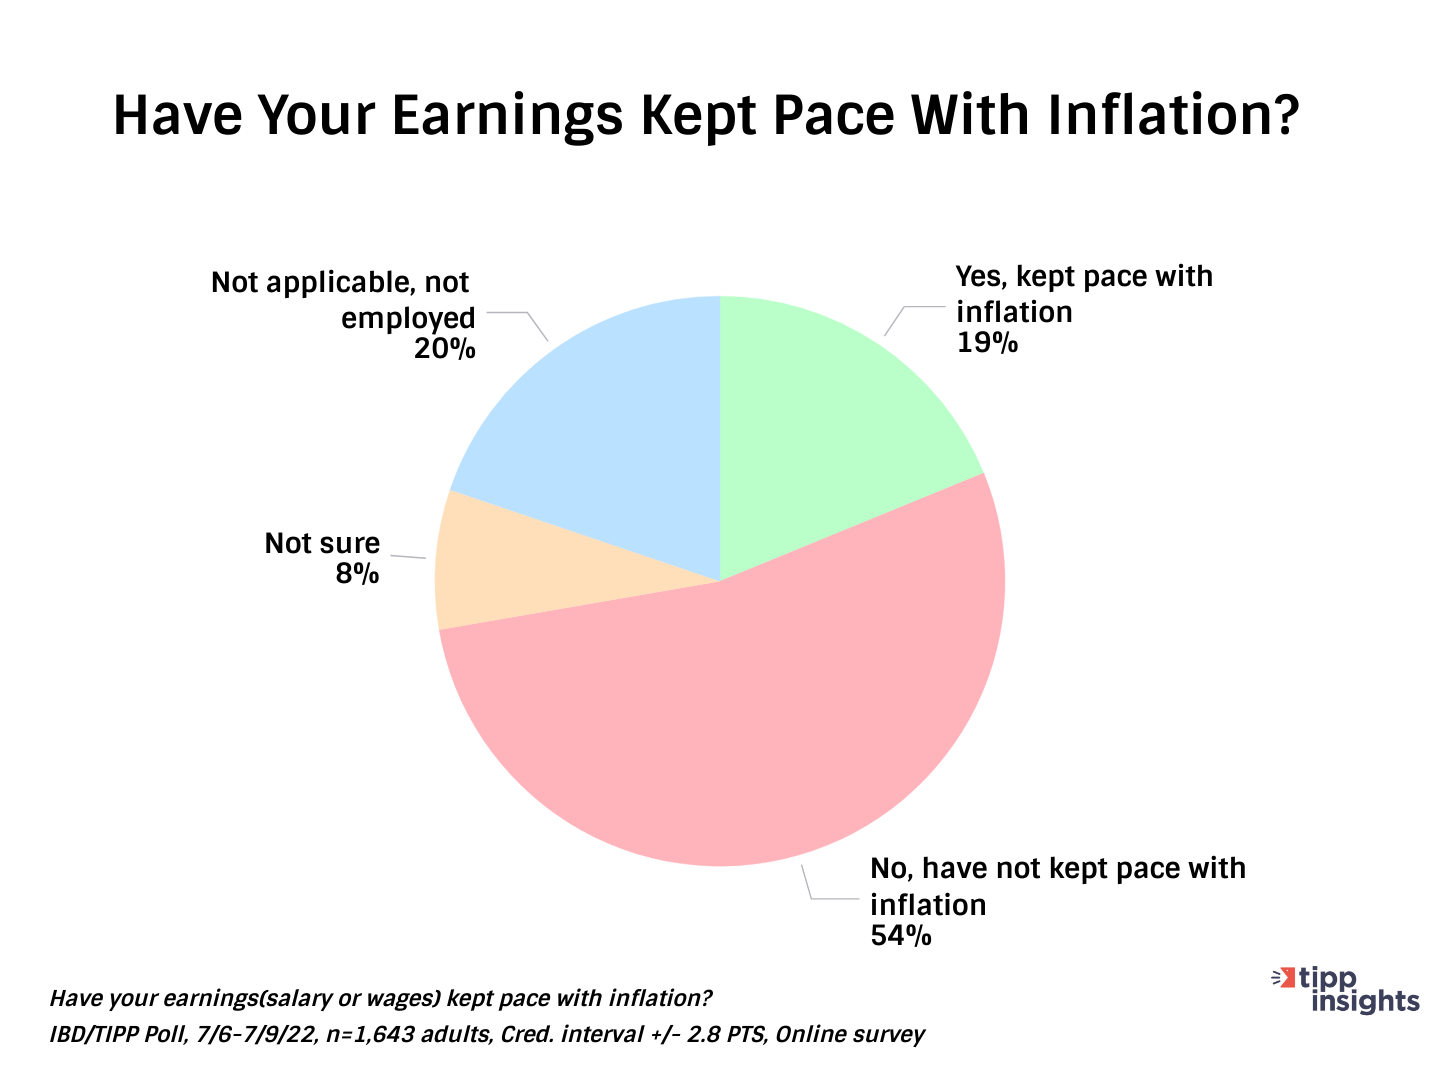 IBD/TIPP Poll Results: Have American's earnings kept pace with inflation? 54% say they have not